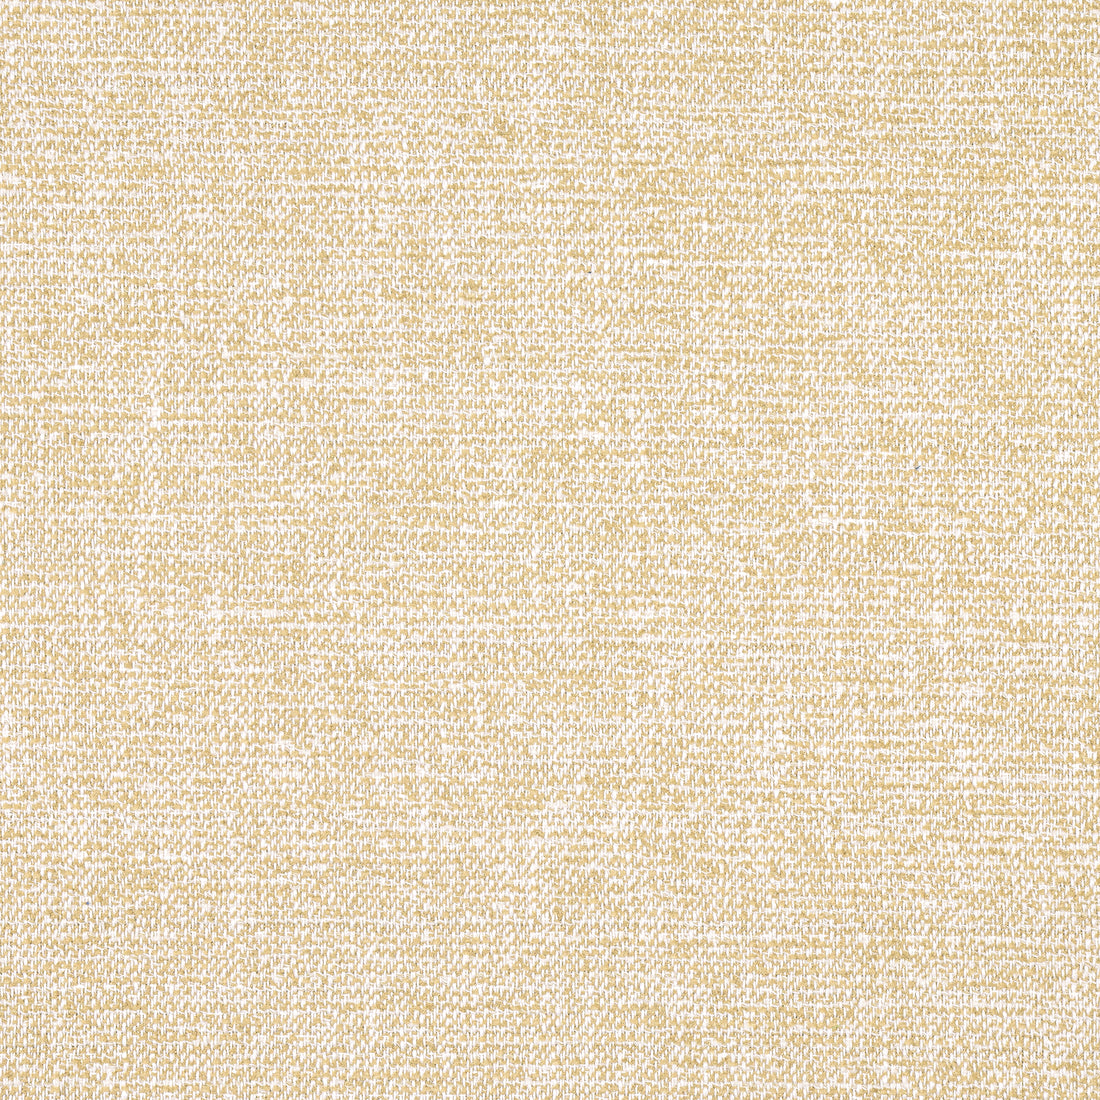 Calais fabric in caramel color - pattern number W8798 - by Thibaut in the Haven Textures collection